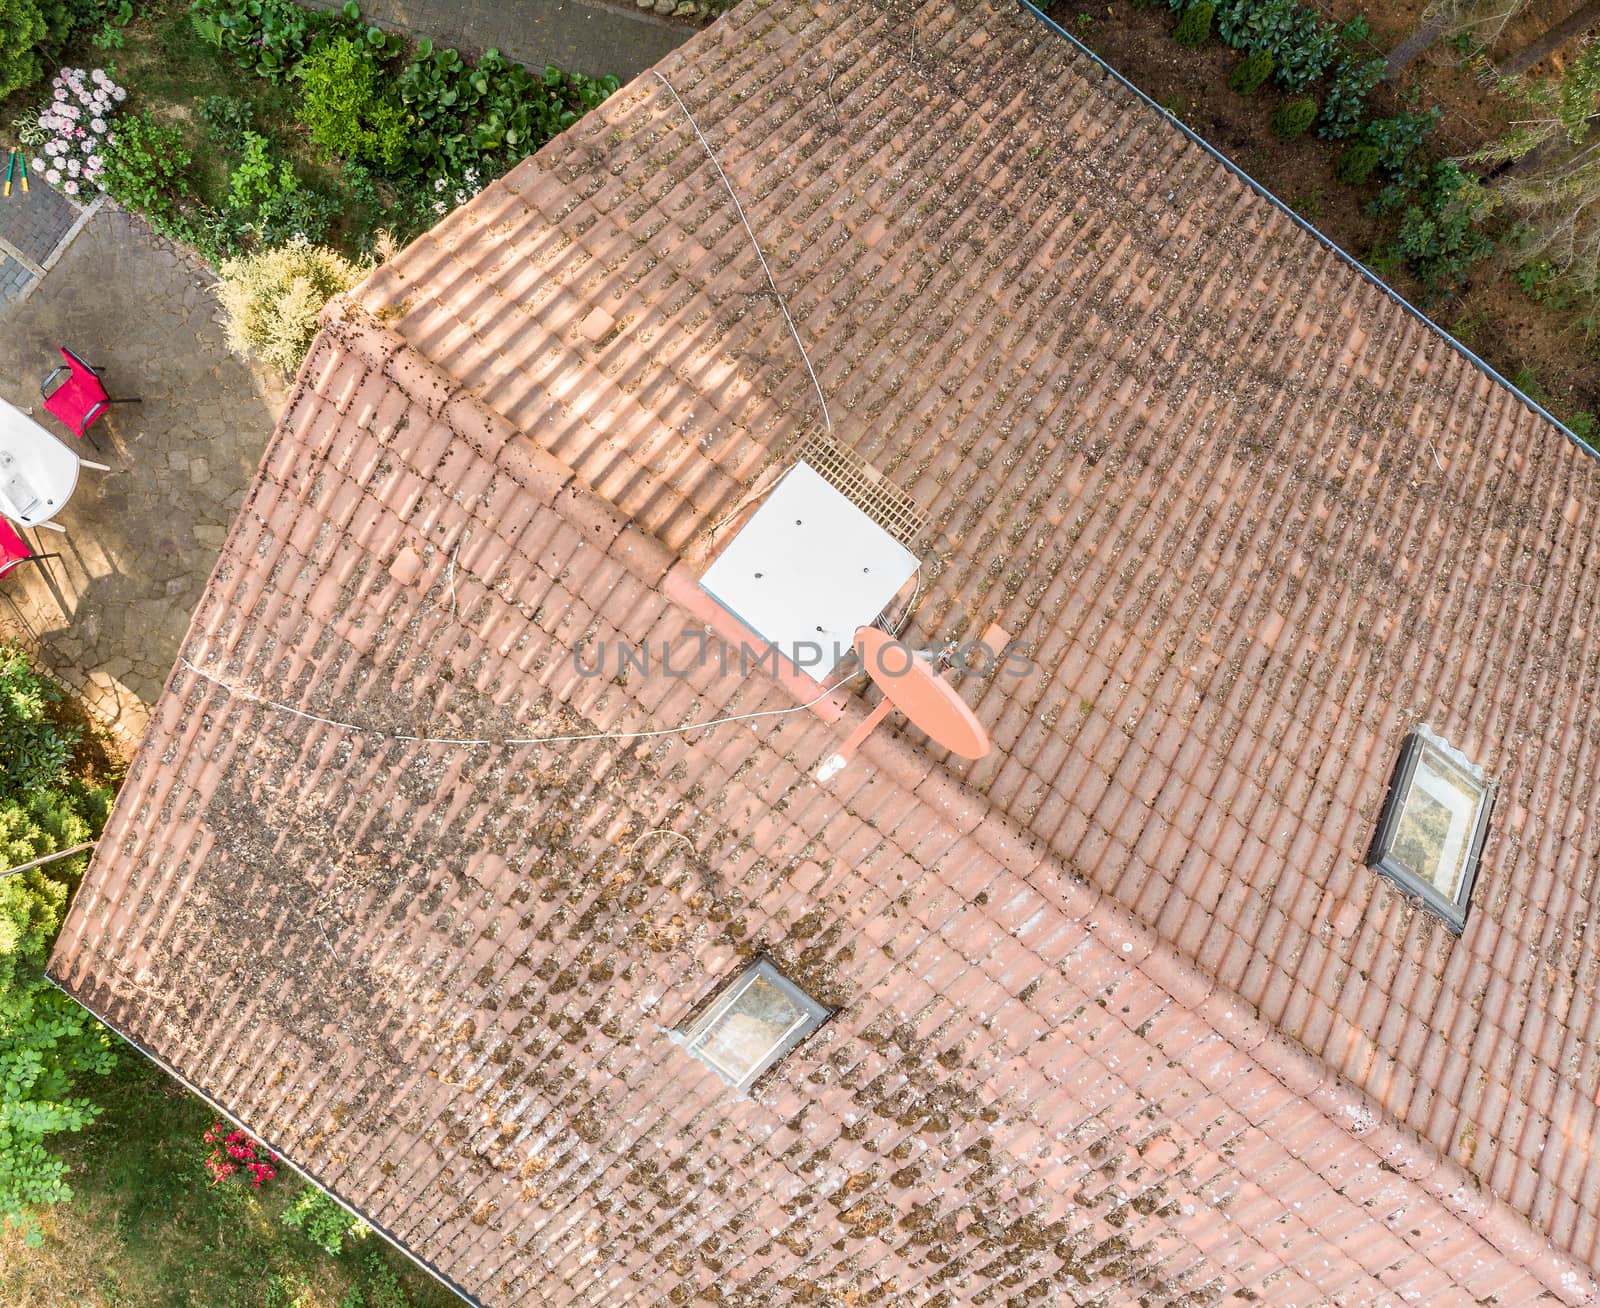 Examination of the roof of a house with a drone, aerial photograph, from the roof of a detached house, Germany